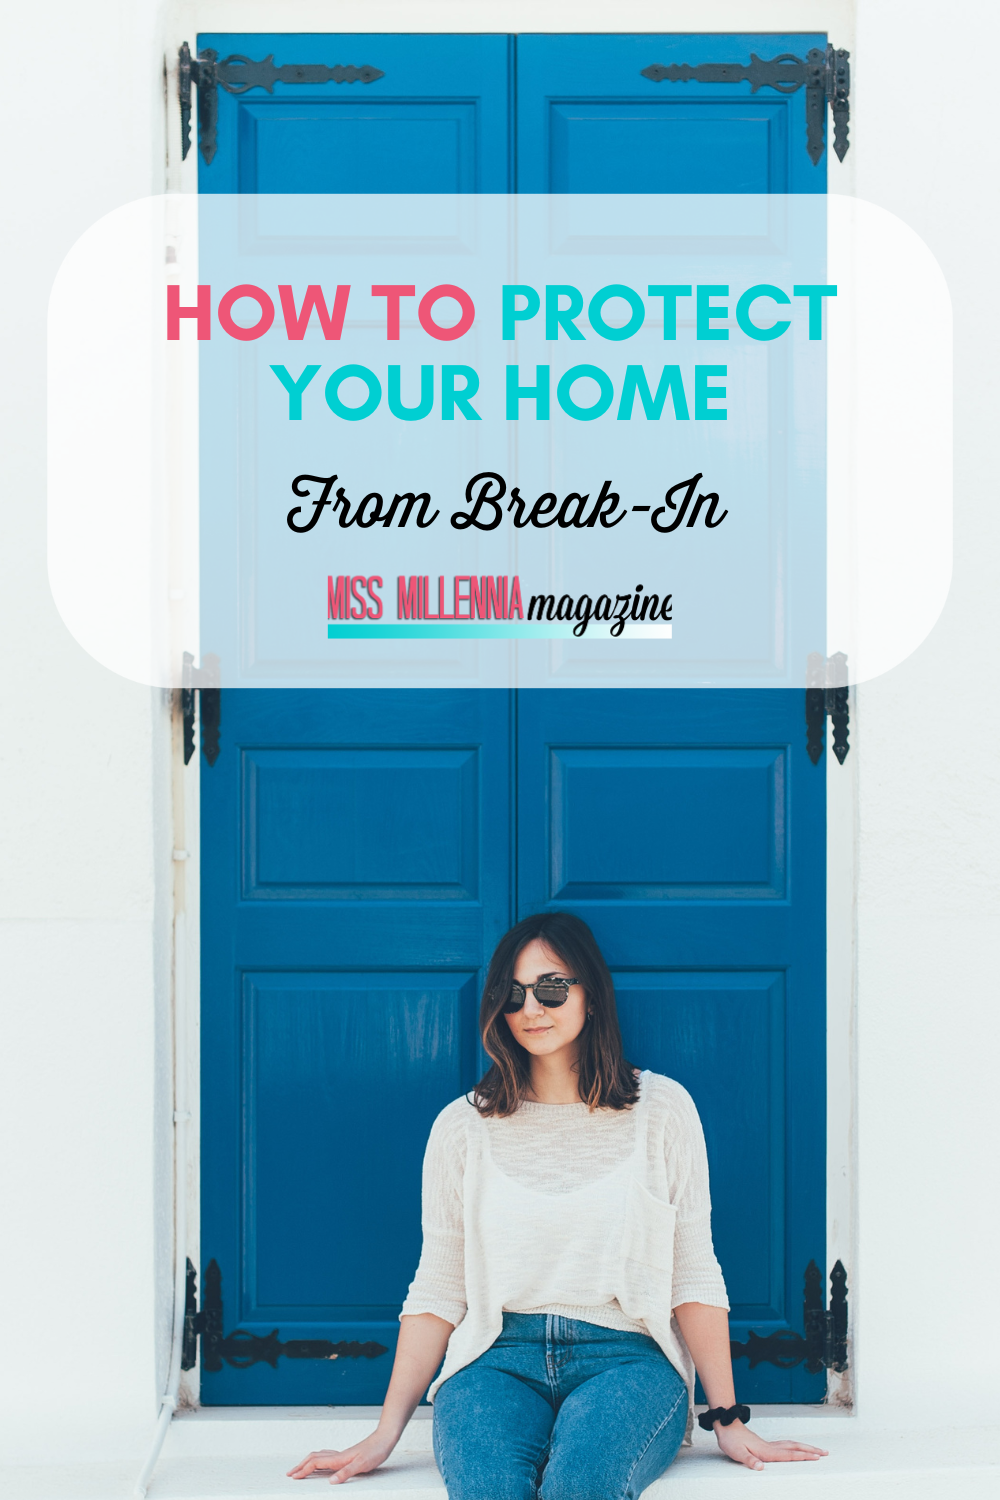 How To Protect Your Home From Break-In